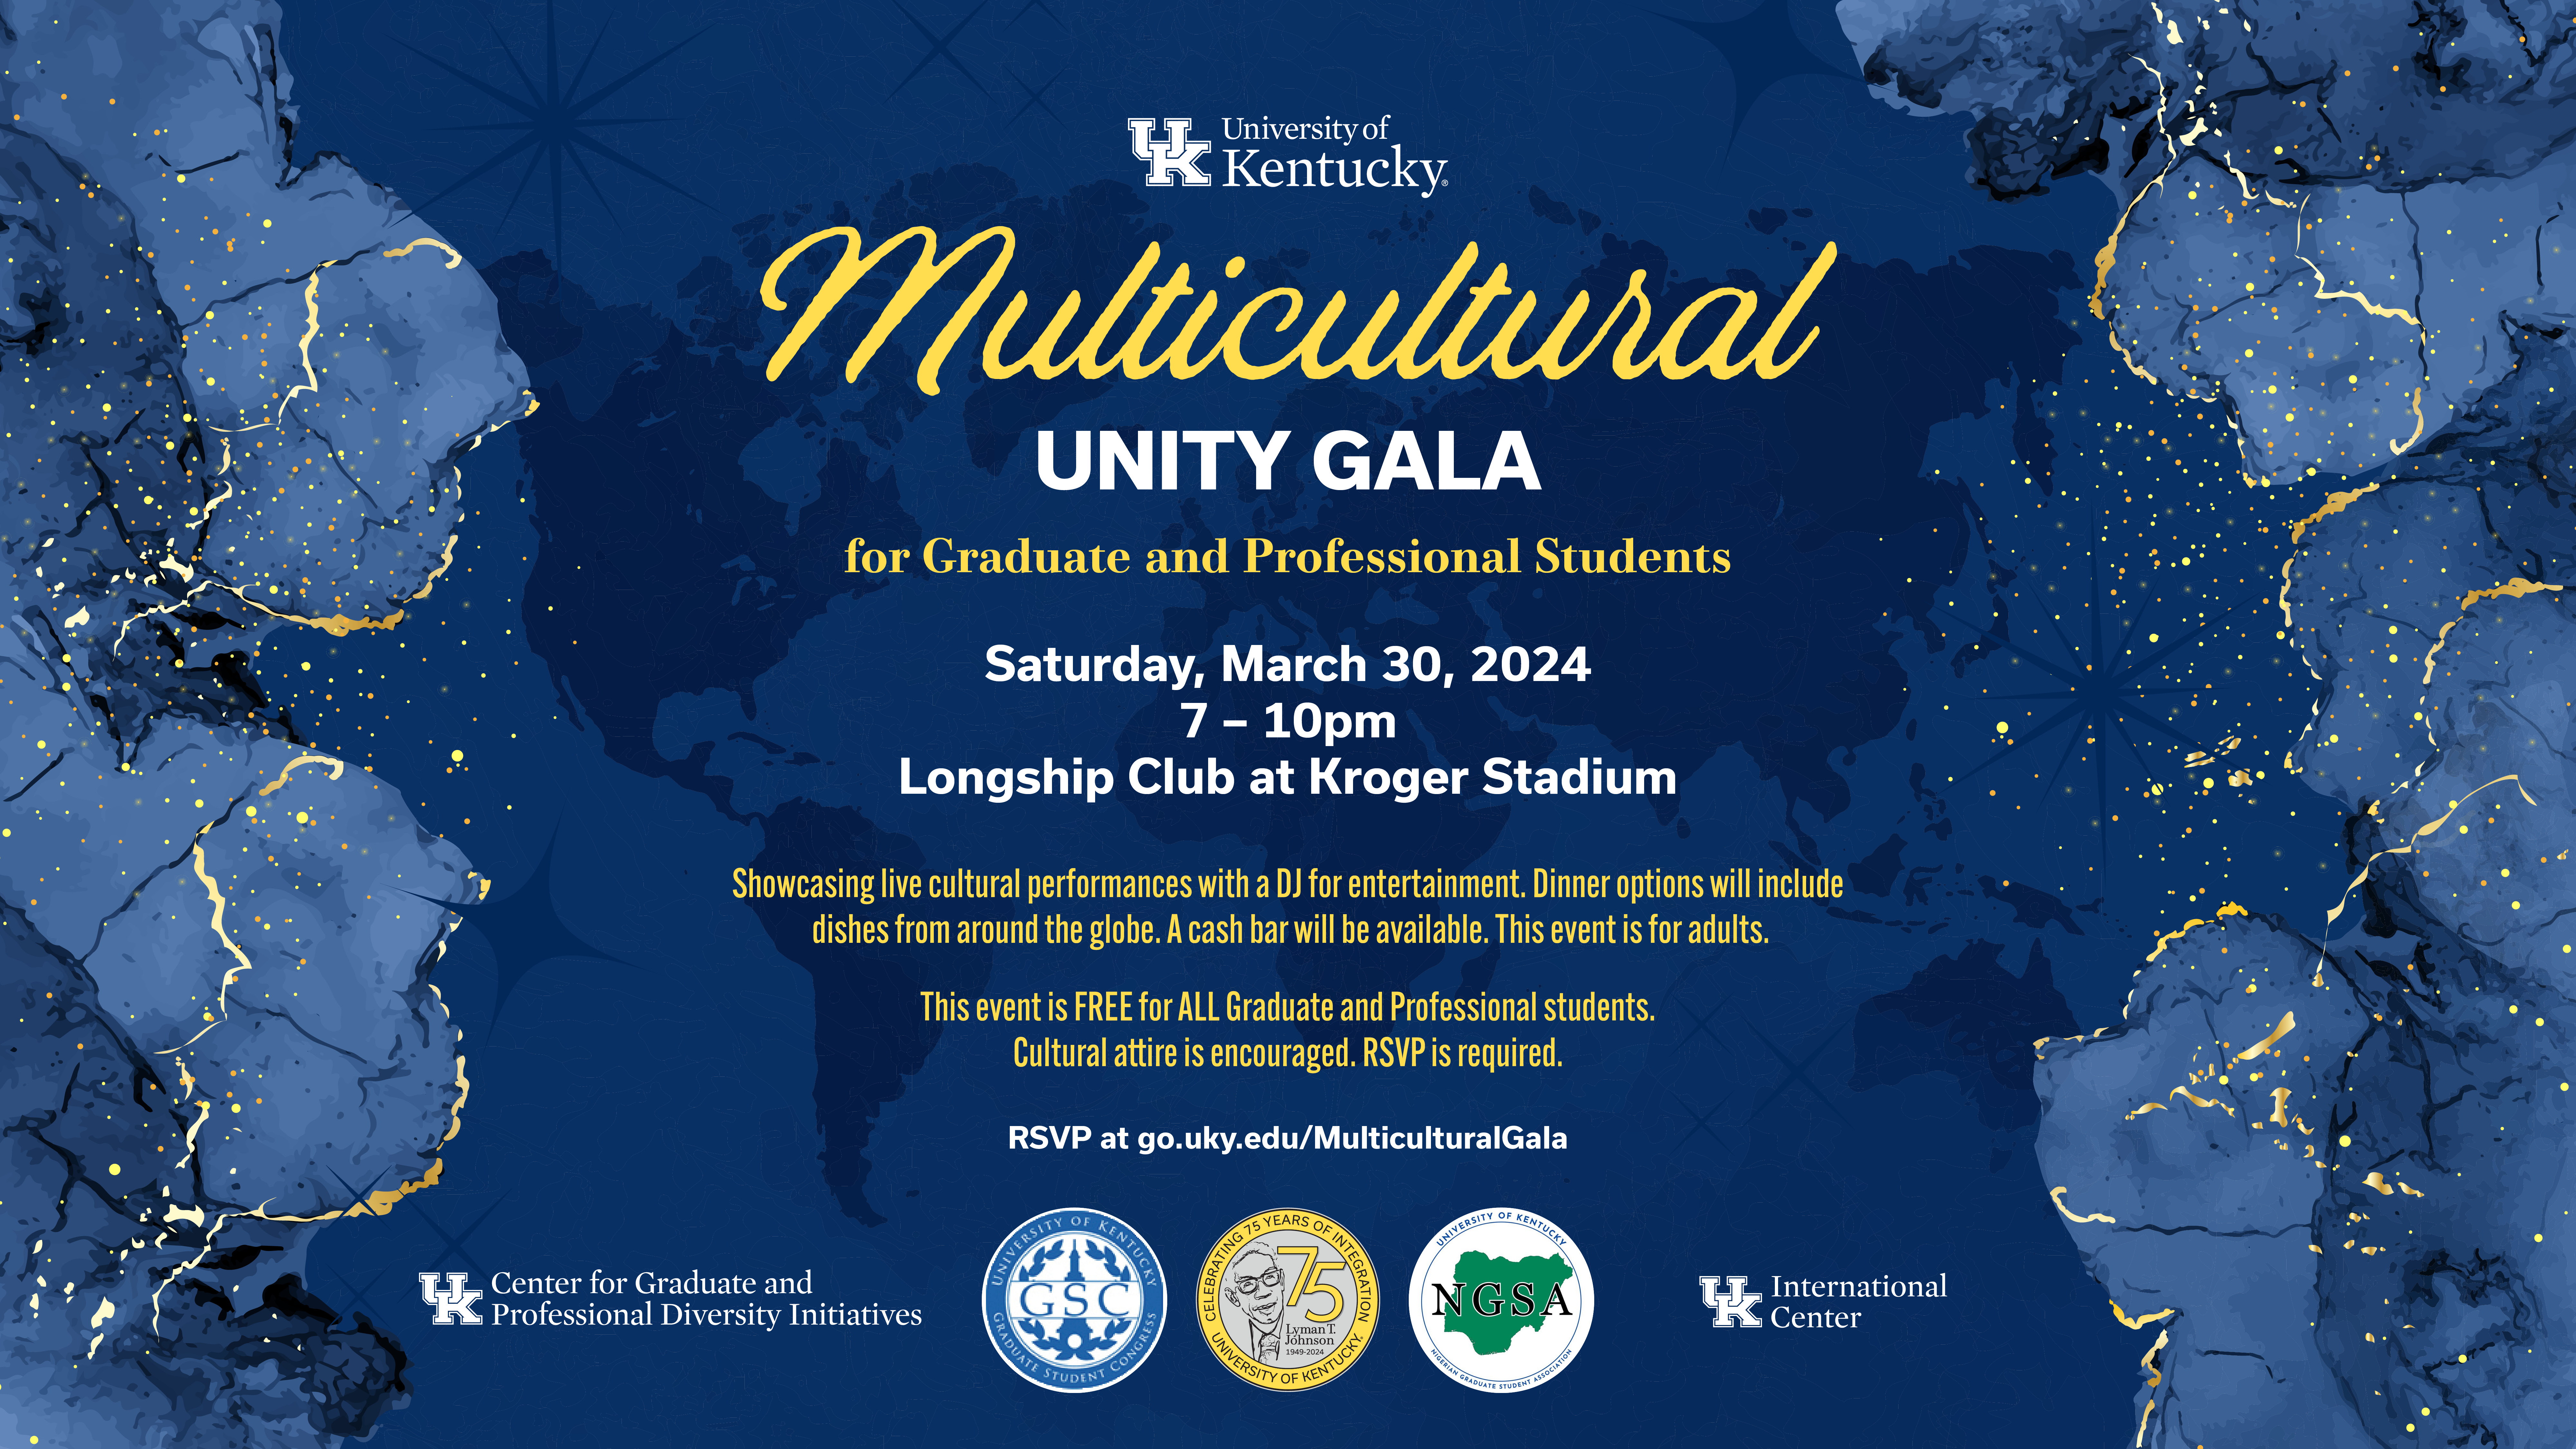 Multicultural Unity Gala